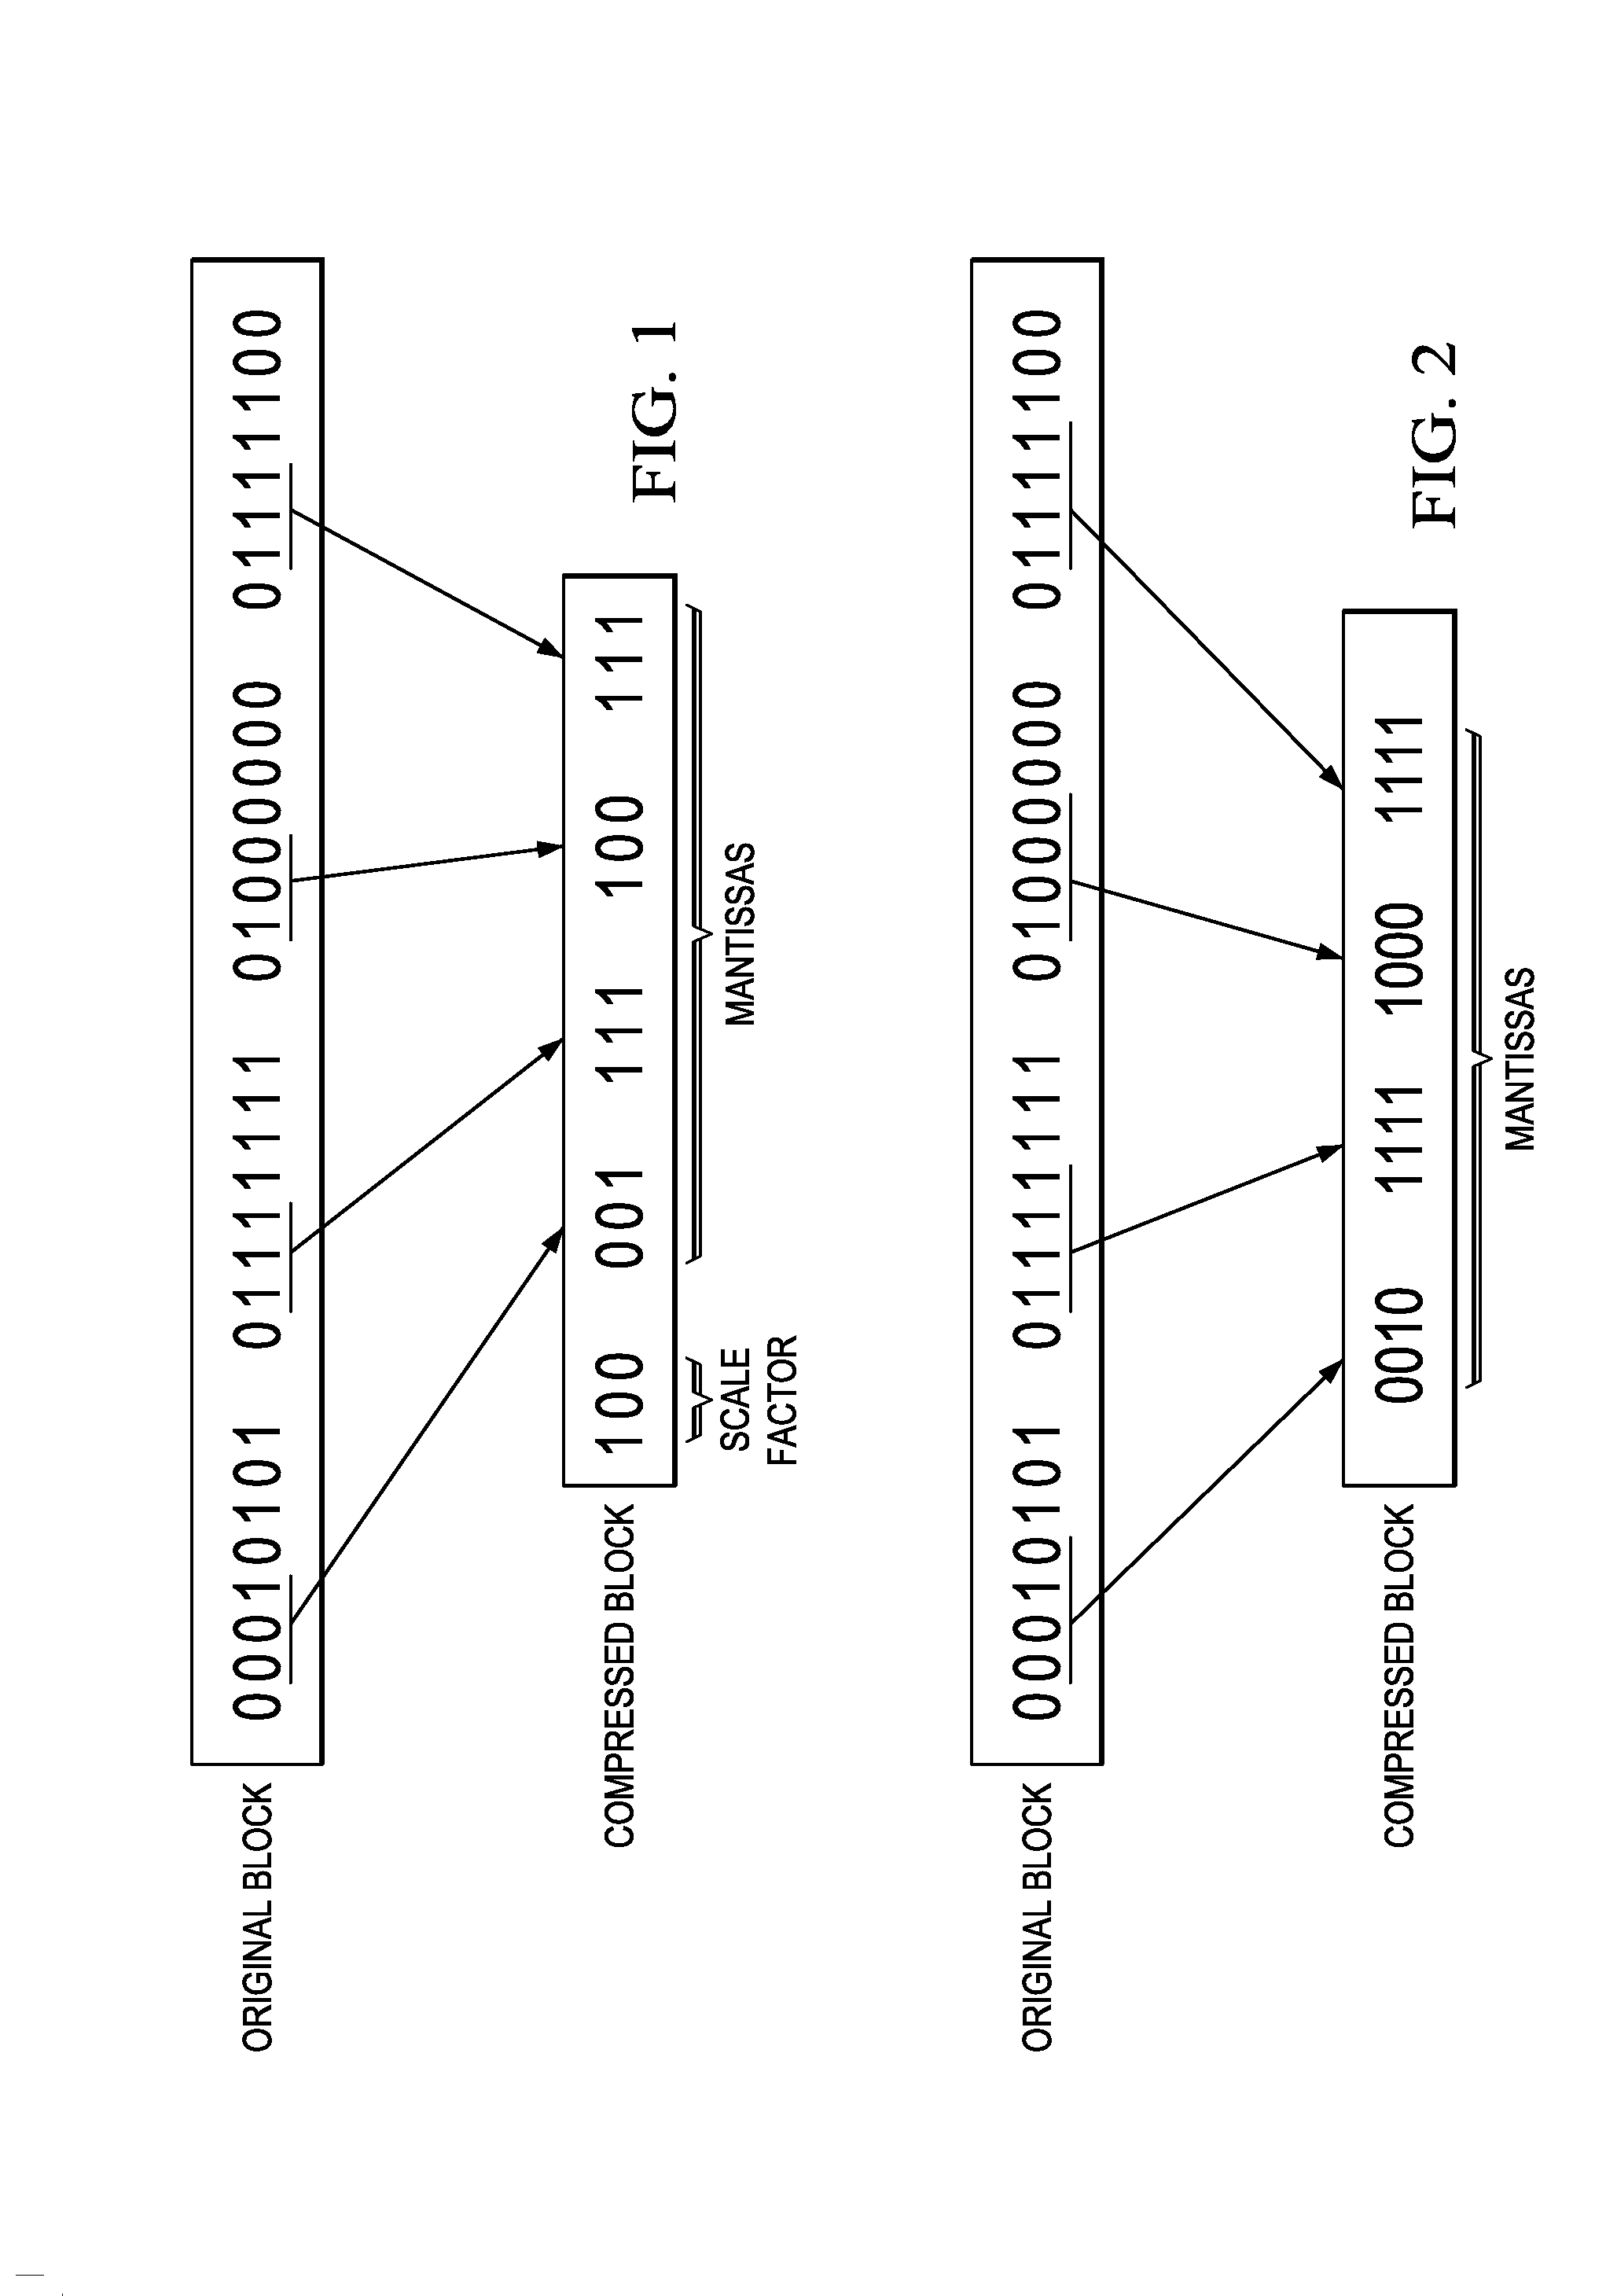 Method and System for Compression of Radar Signals